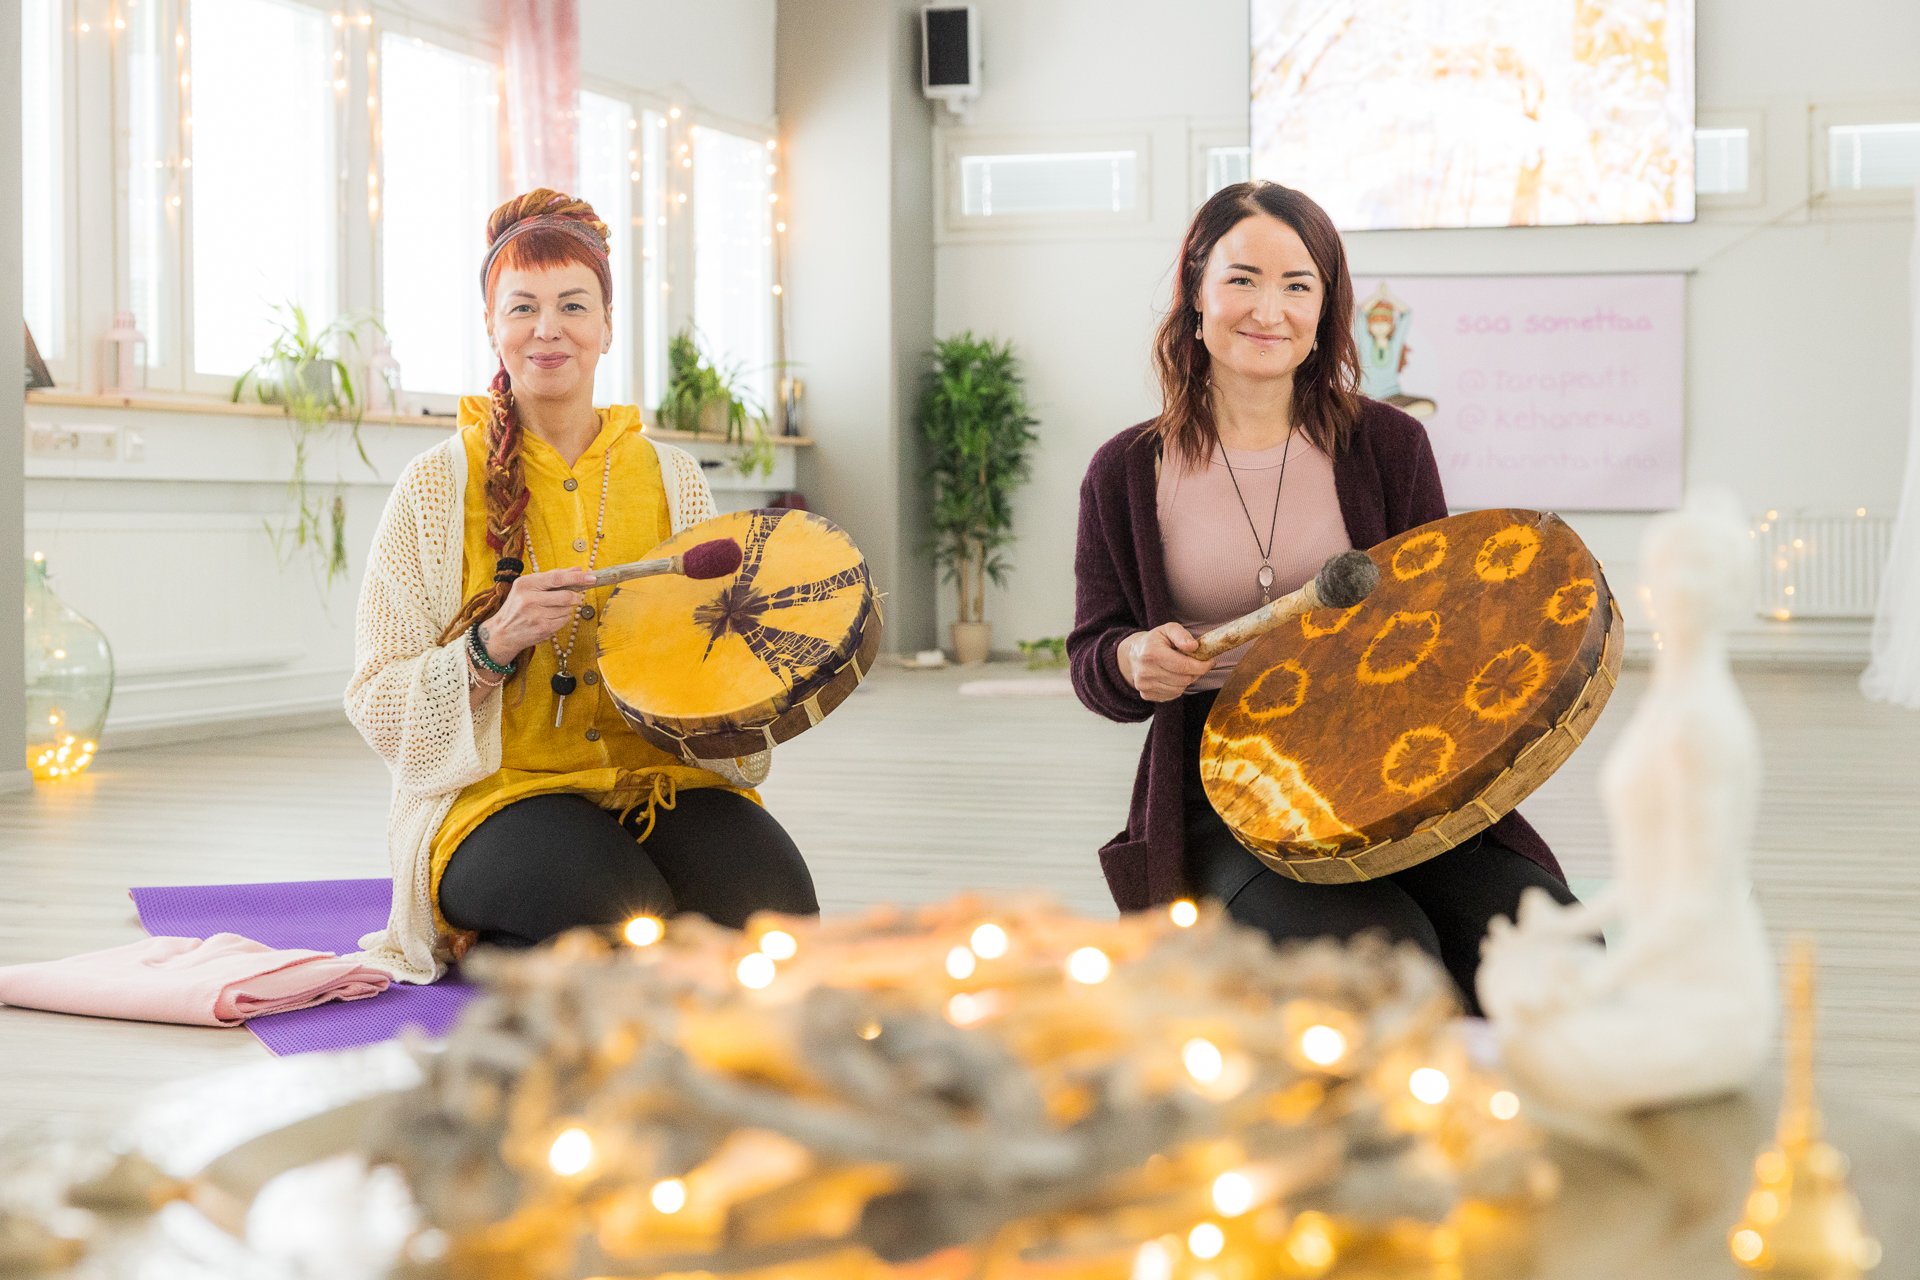 Geneesi's Taara Tuomisilta and Maiju Rissanen play shaman drums in the company's premises. | Business Joensuu, business services